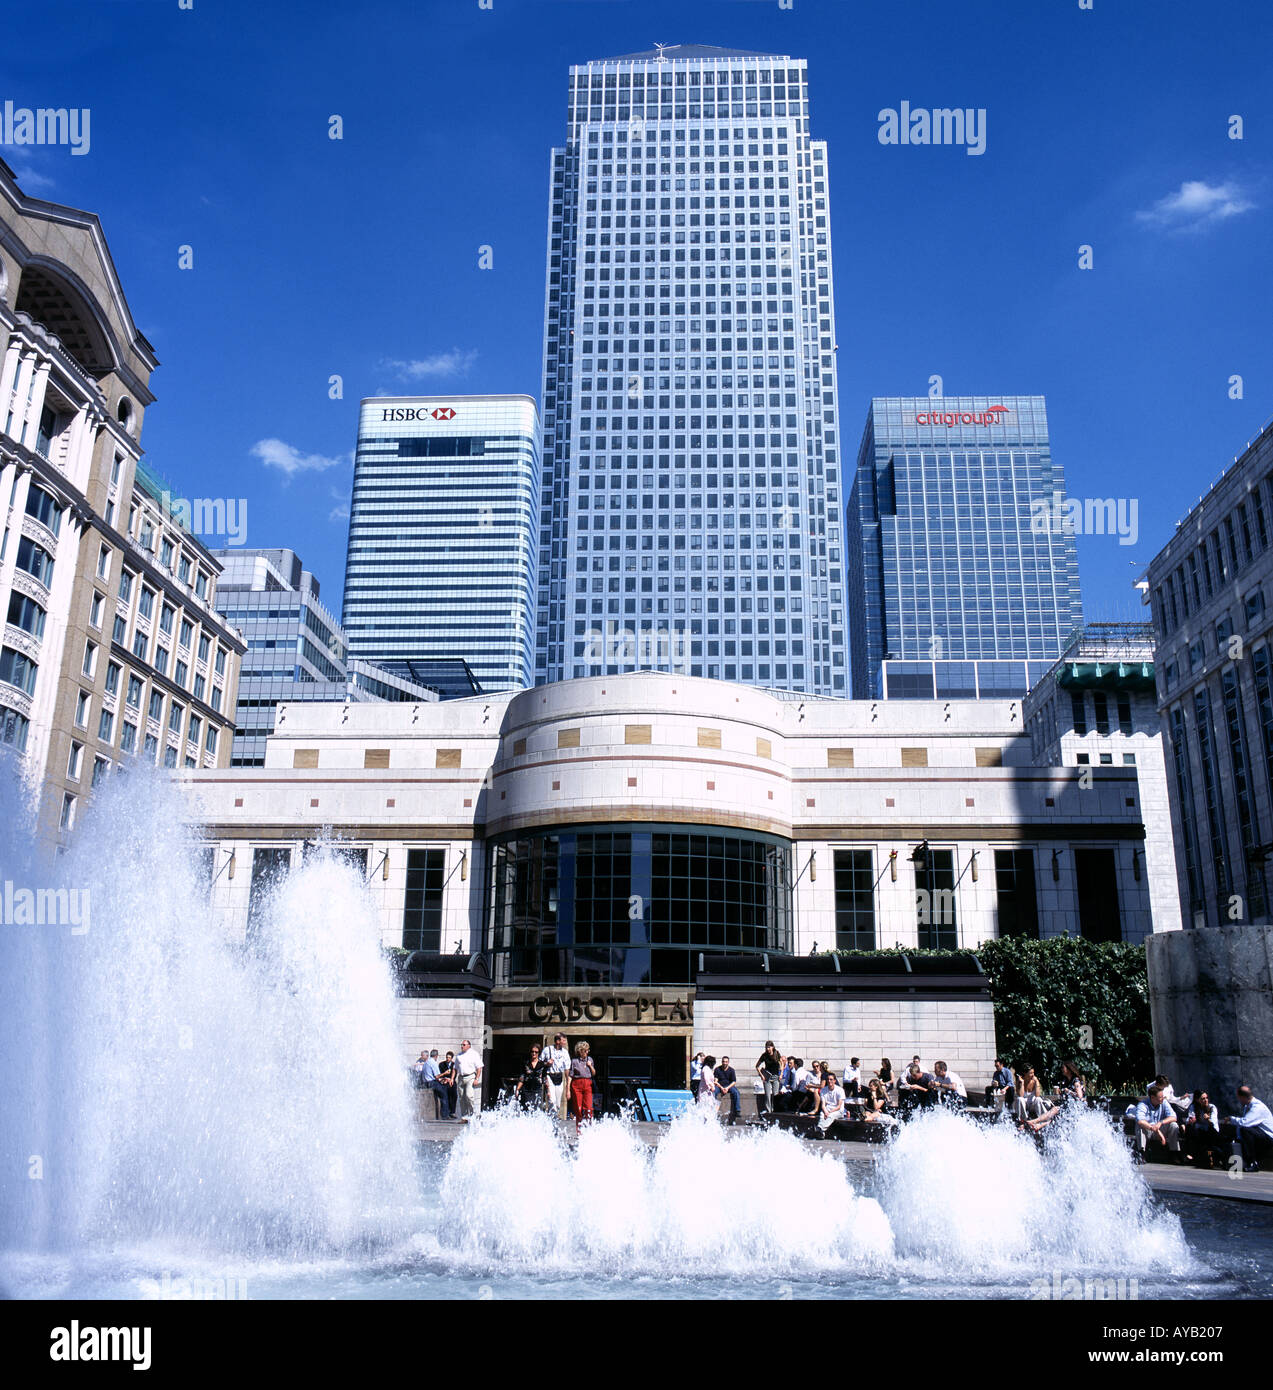 Cabot Square a Canary Wharf in London Docklands Foto Stock